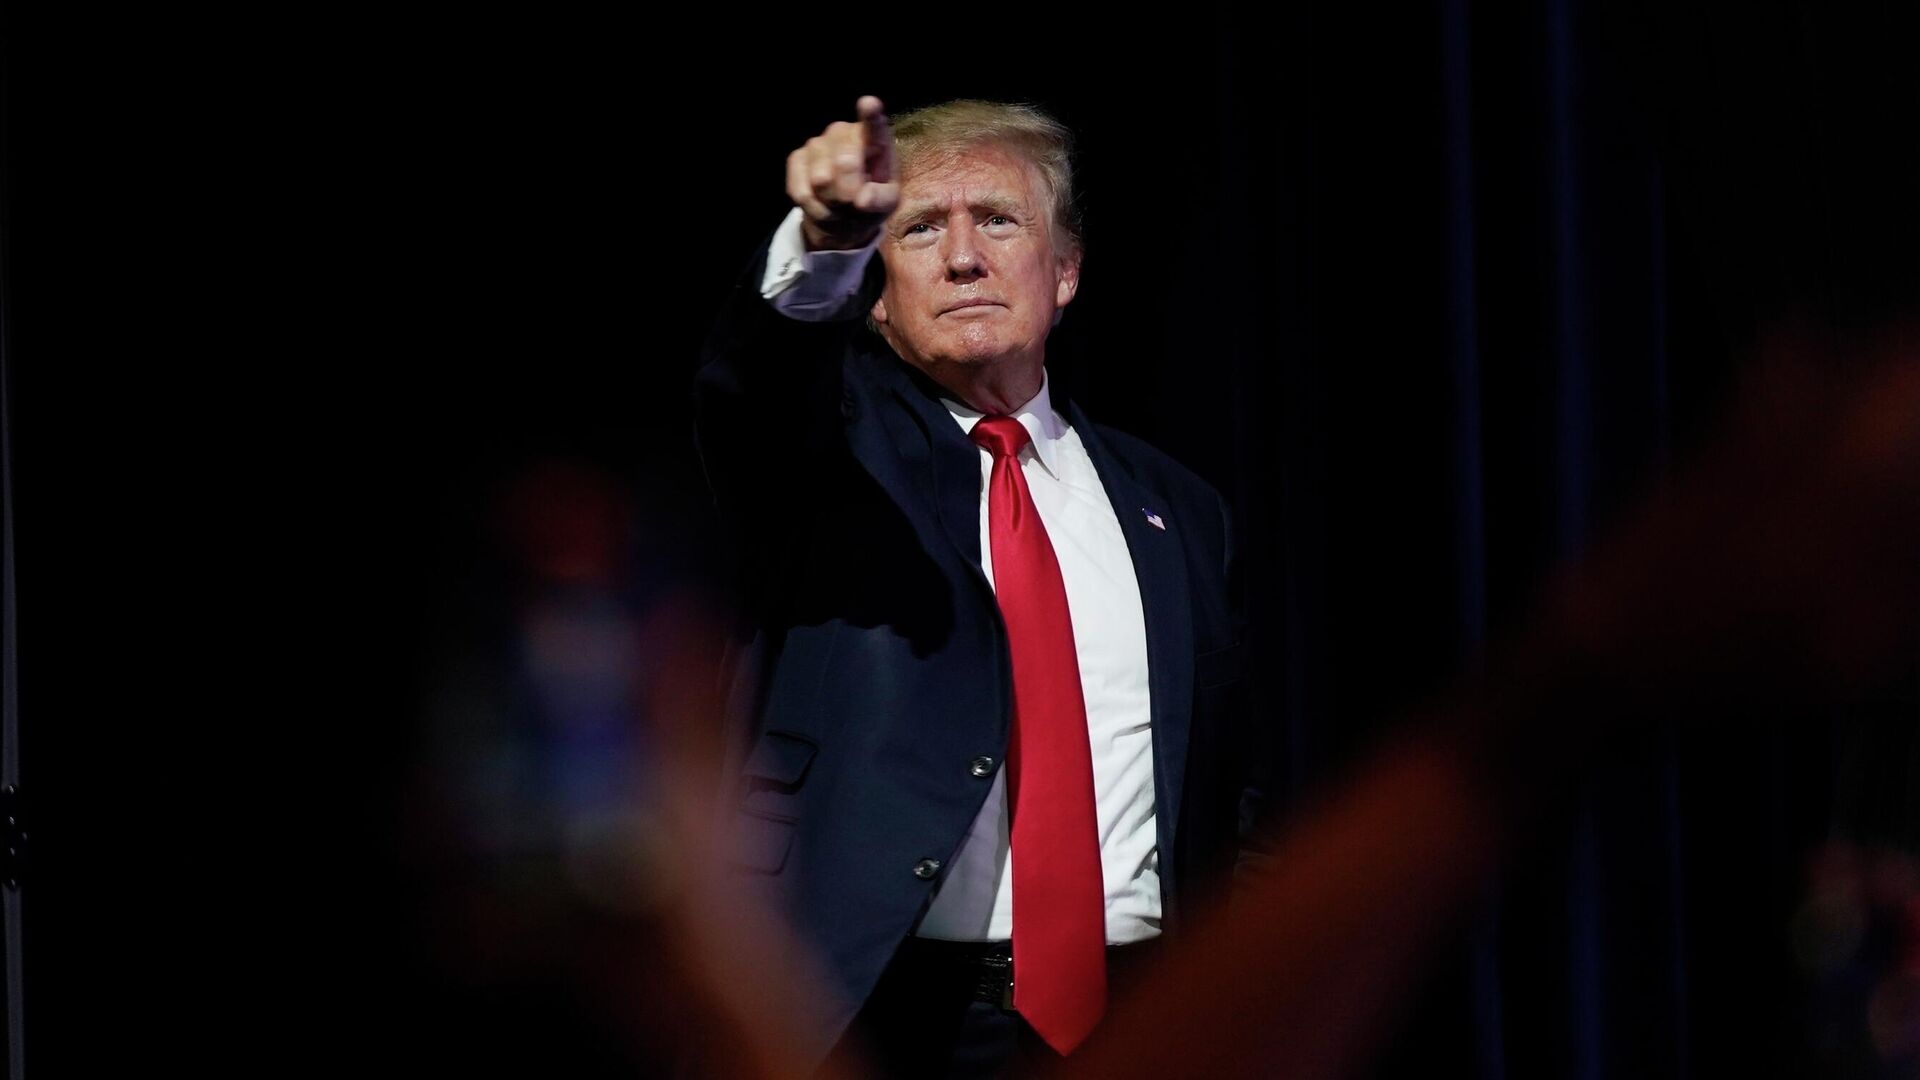 FILE - In this July 24, 2021, file photo, former President Donald Trump points to supporters after speaking at a Turning Point Action gathering, in Phoenix - Sputnik International, 1920, 19.01.2022